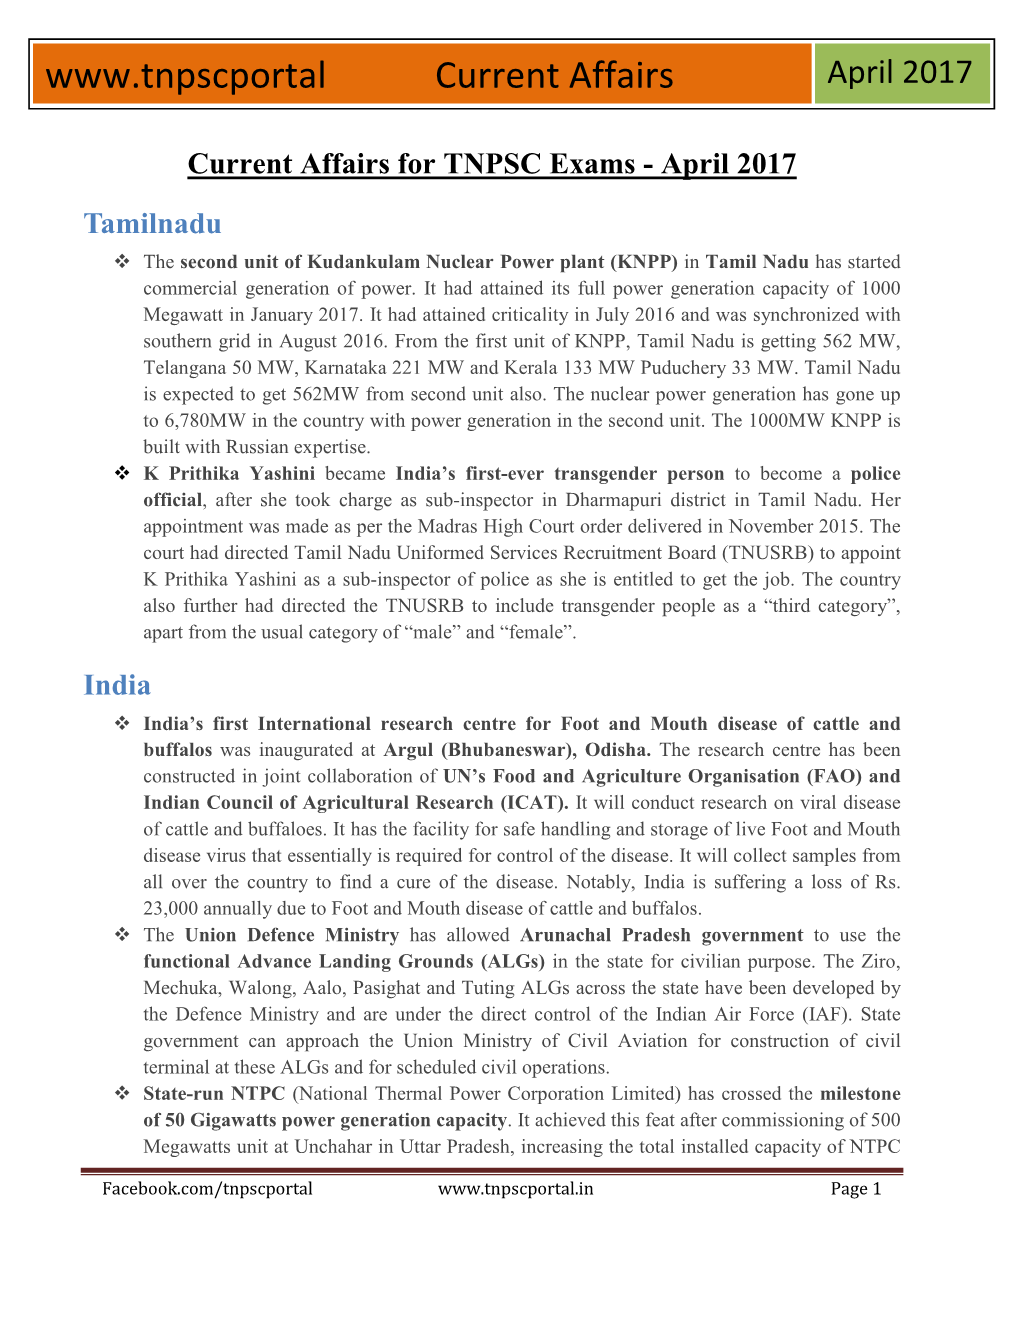 Current Affairs for TNPSC Exams